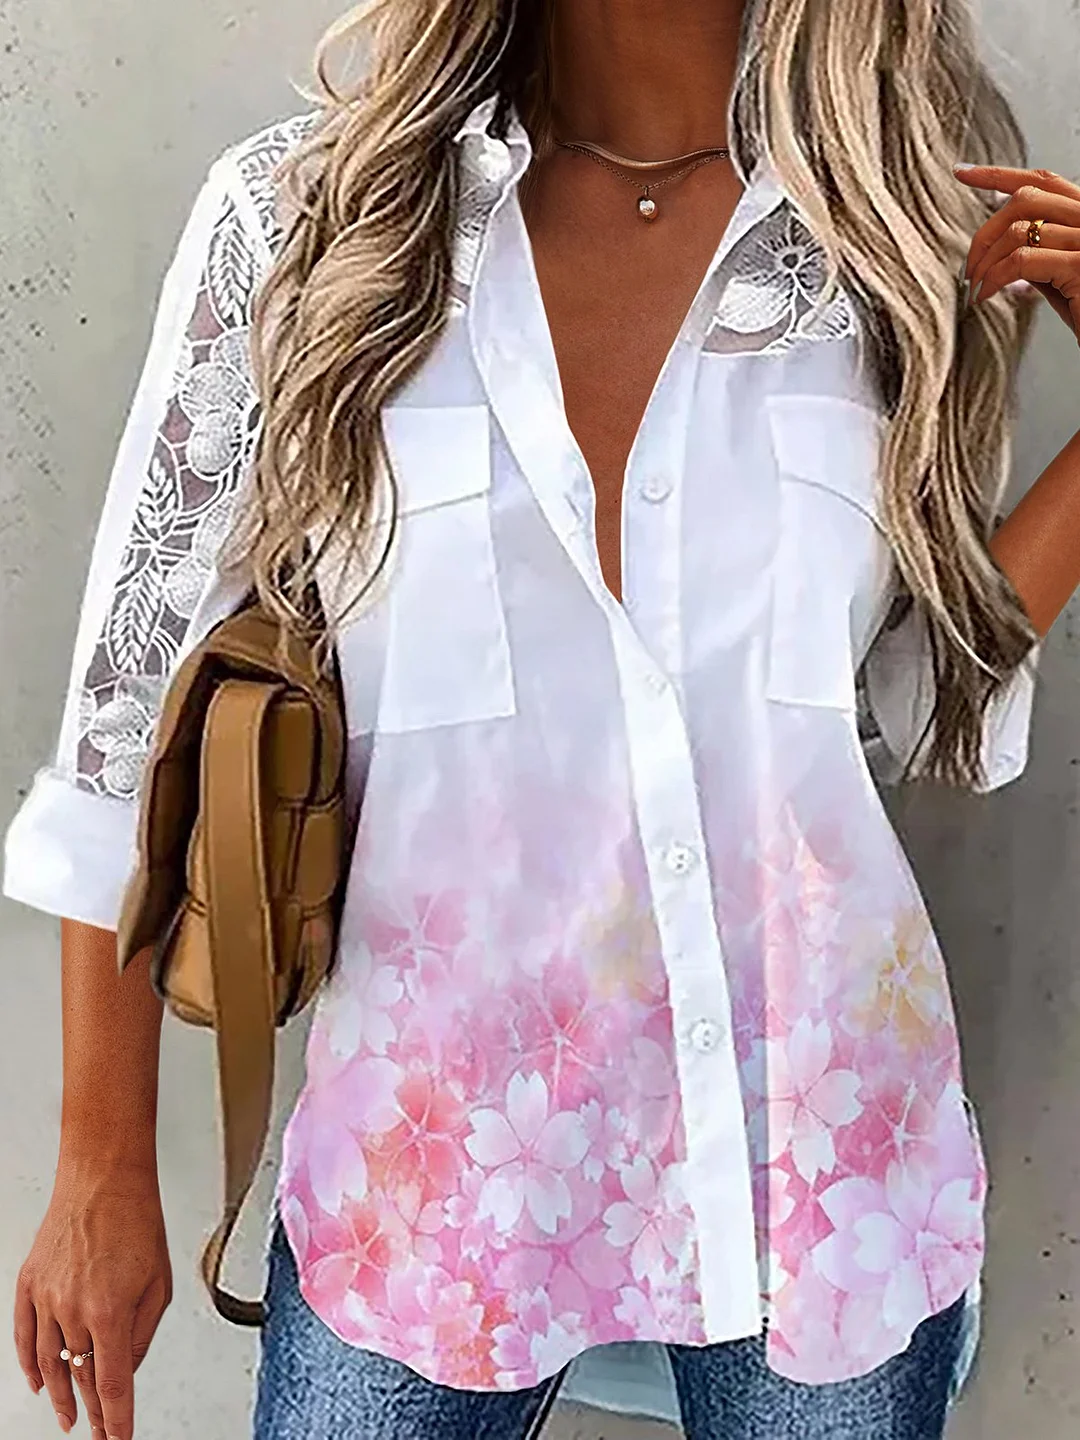 Lace 3/4 Sleeves Floral Printed Pockets Plus Size Casual Shirt